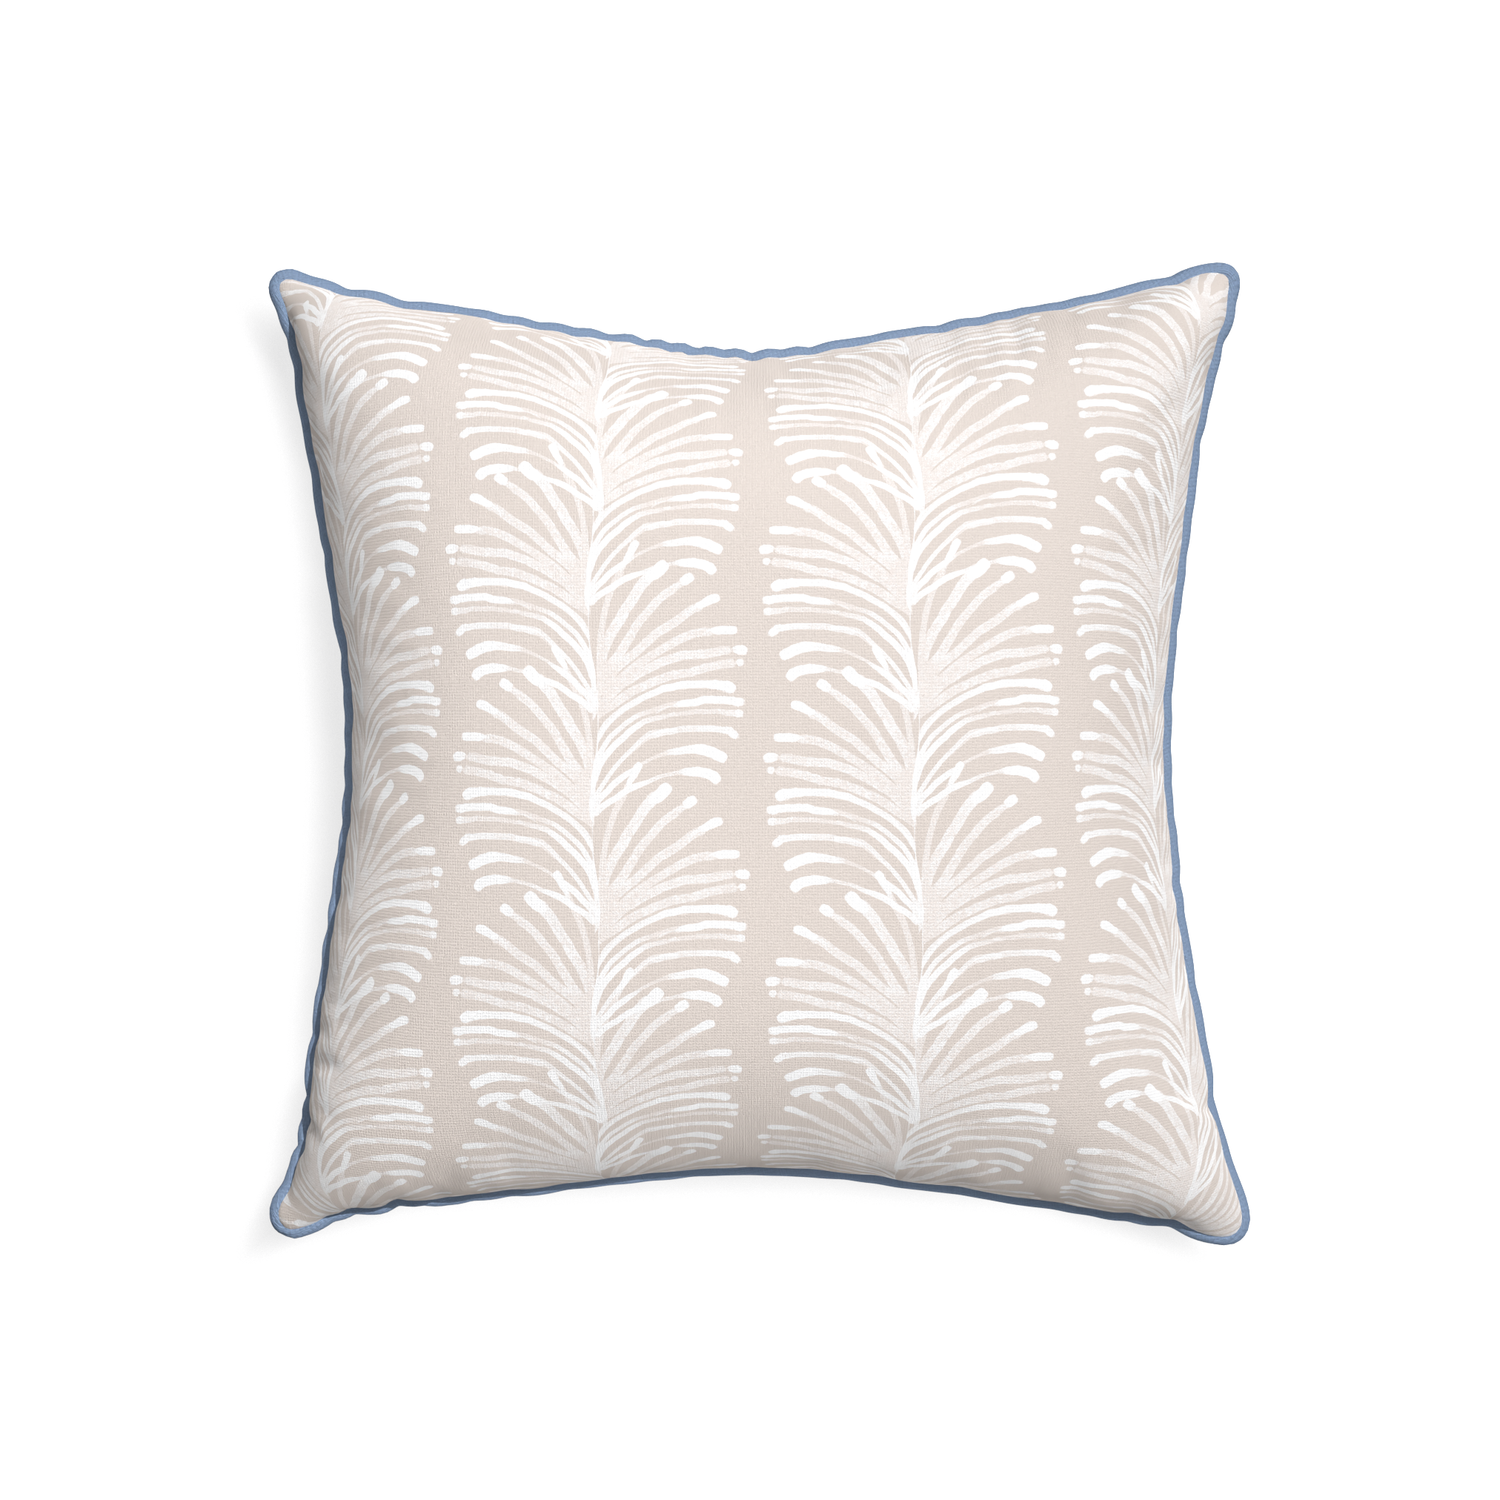 22-square emma sand custom pillow with sky piping on white background